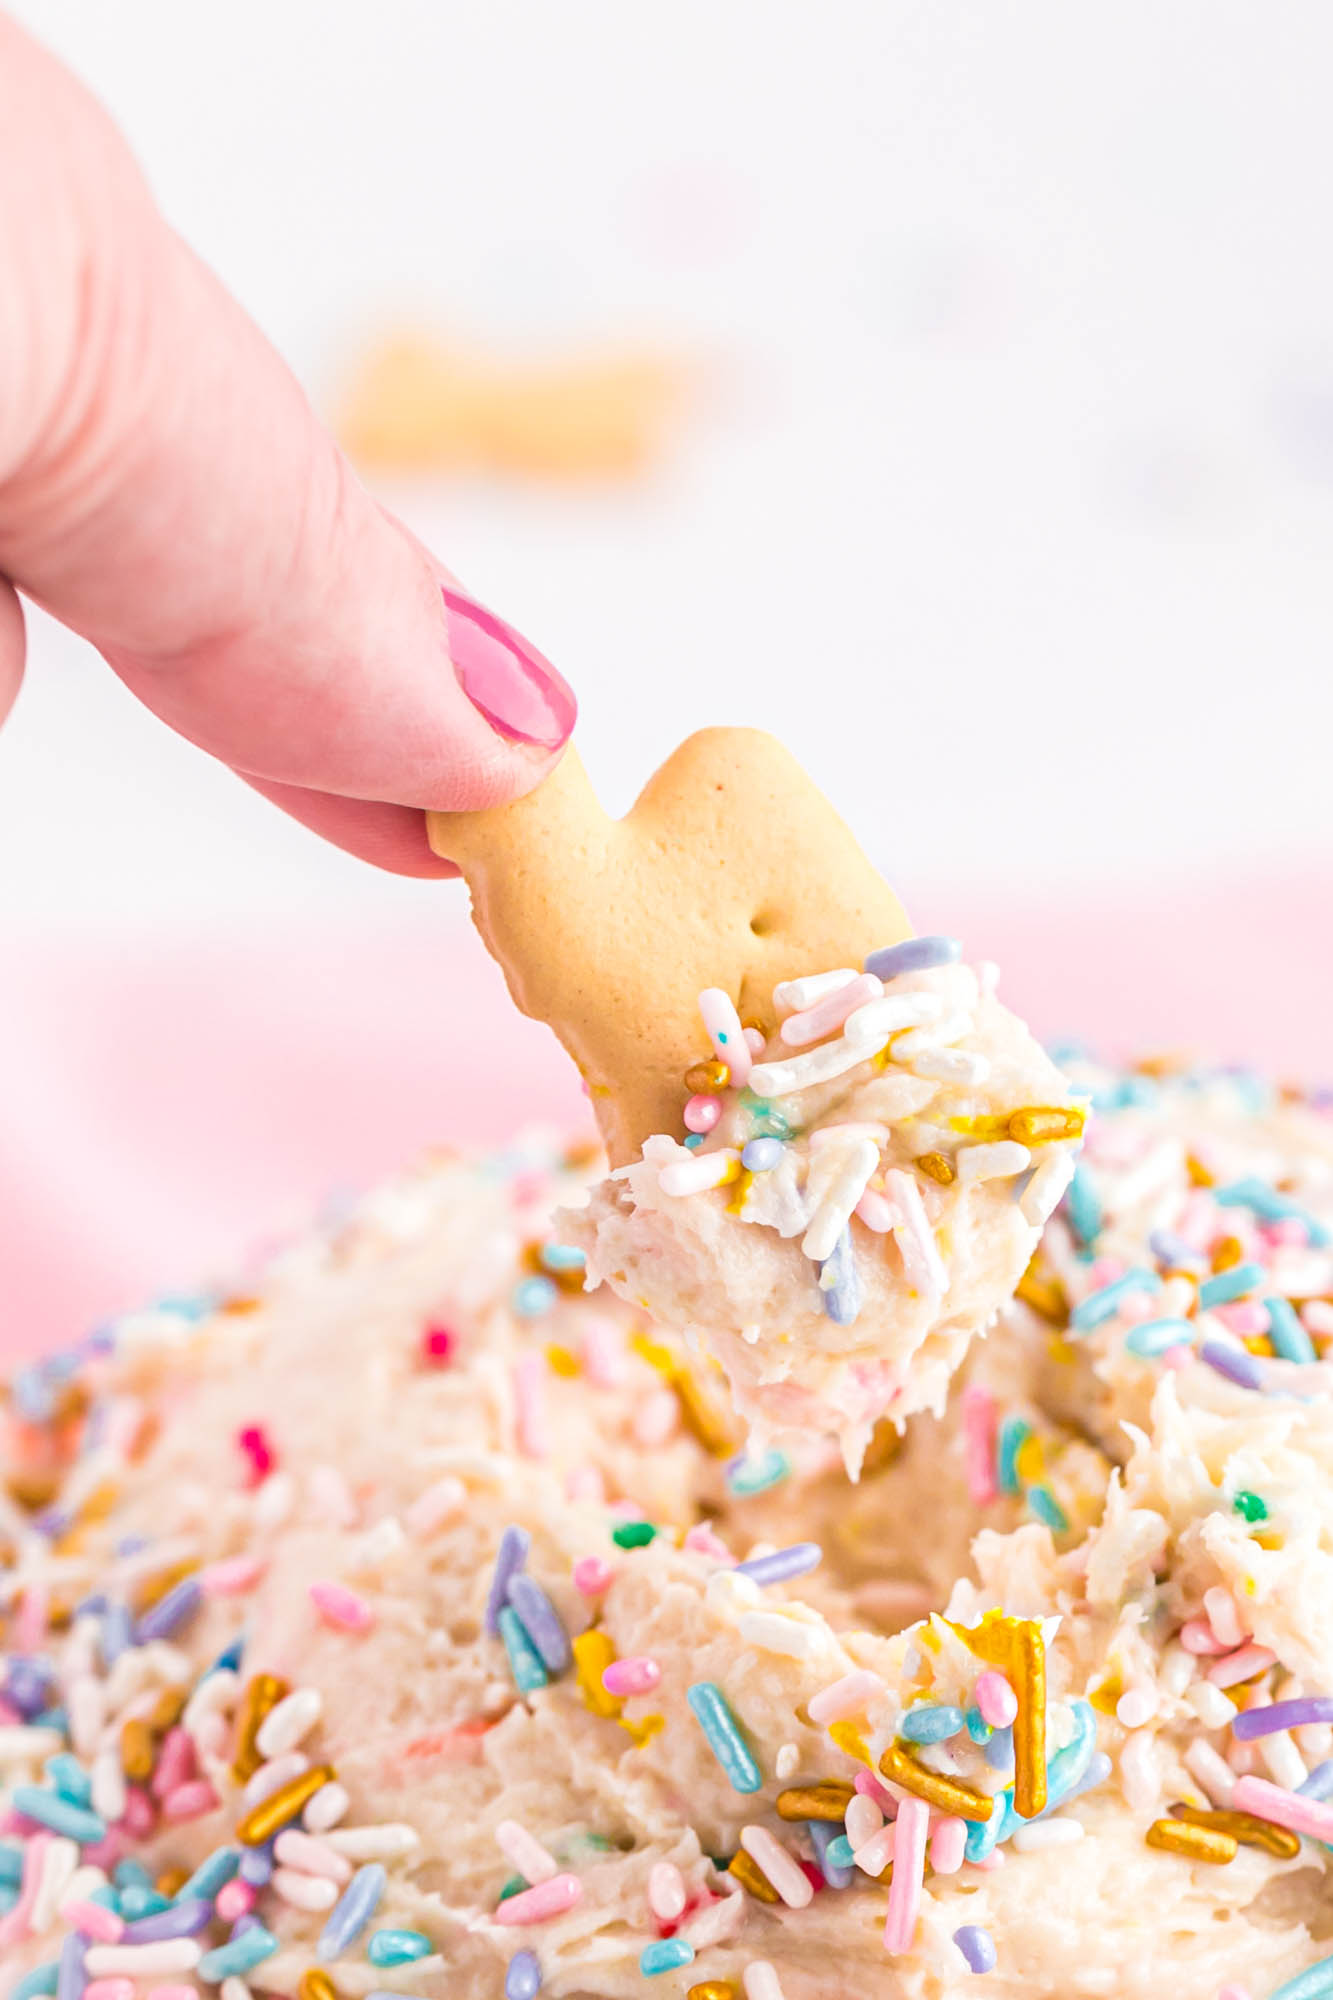 Dipping an animal cracker into the funfetti dip